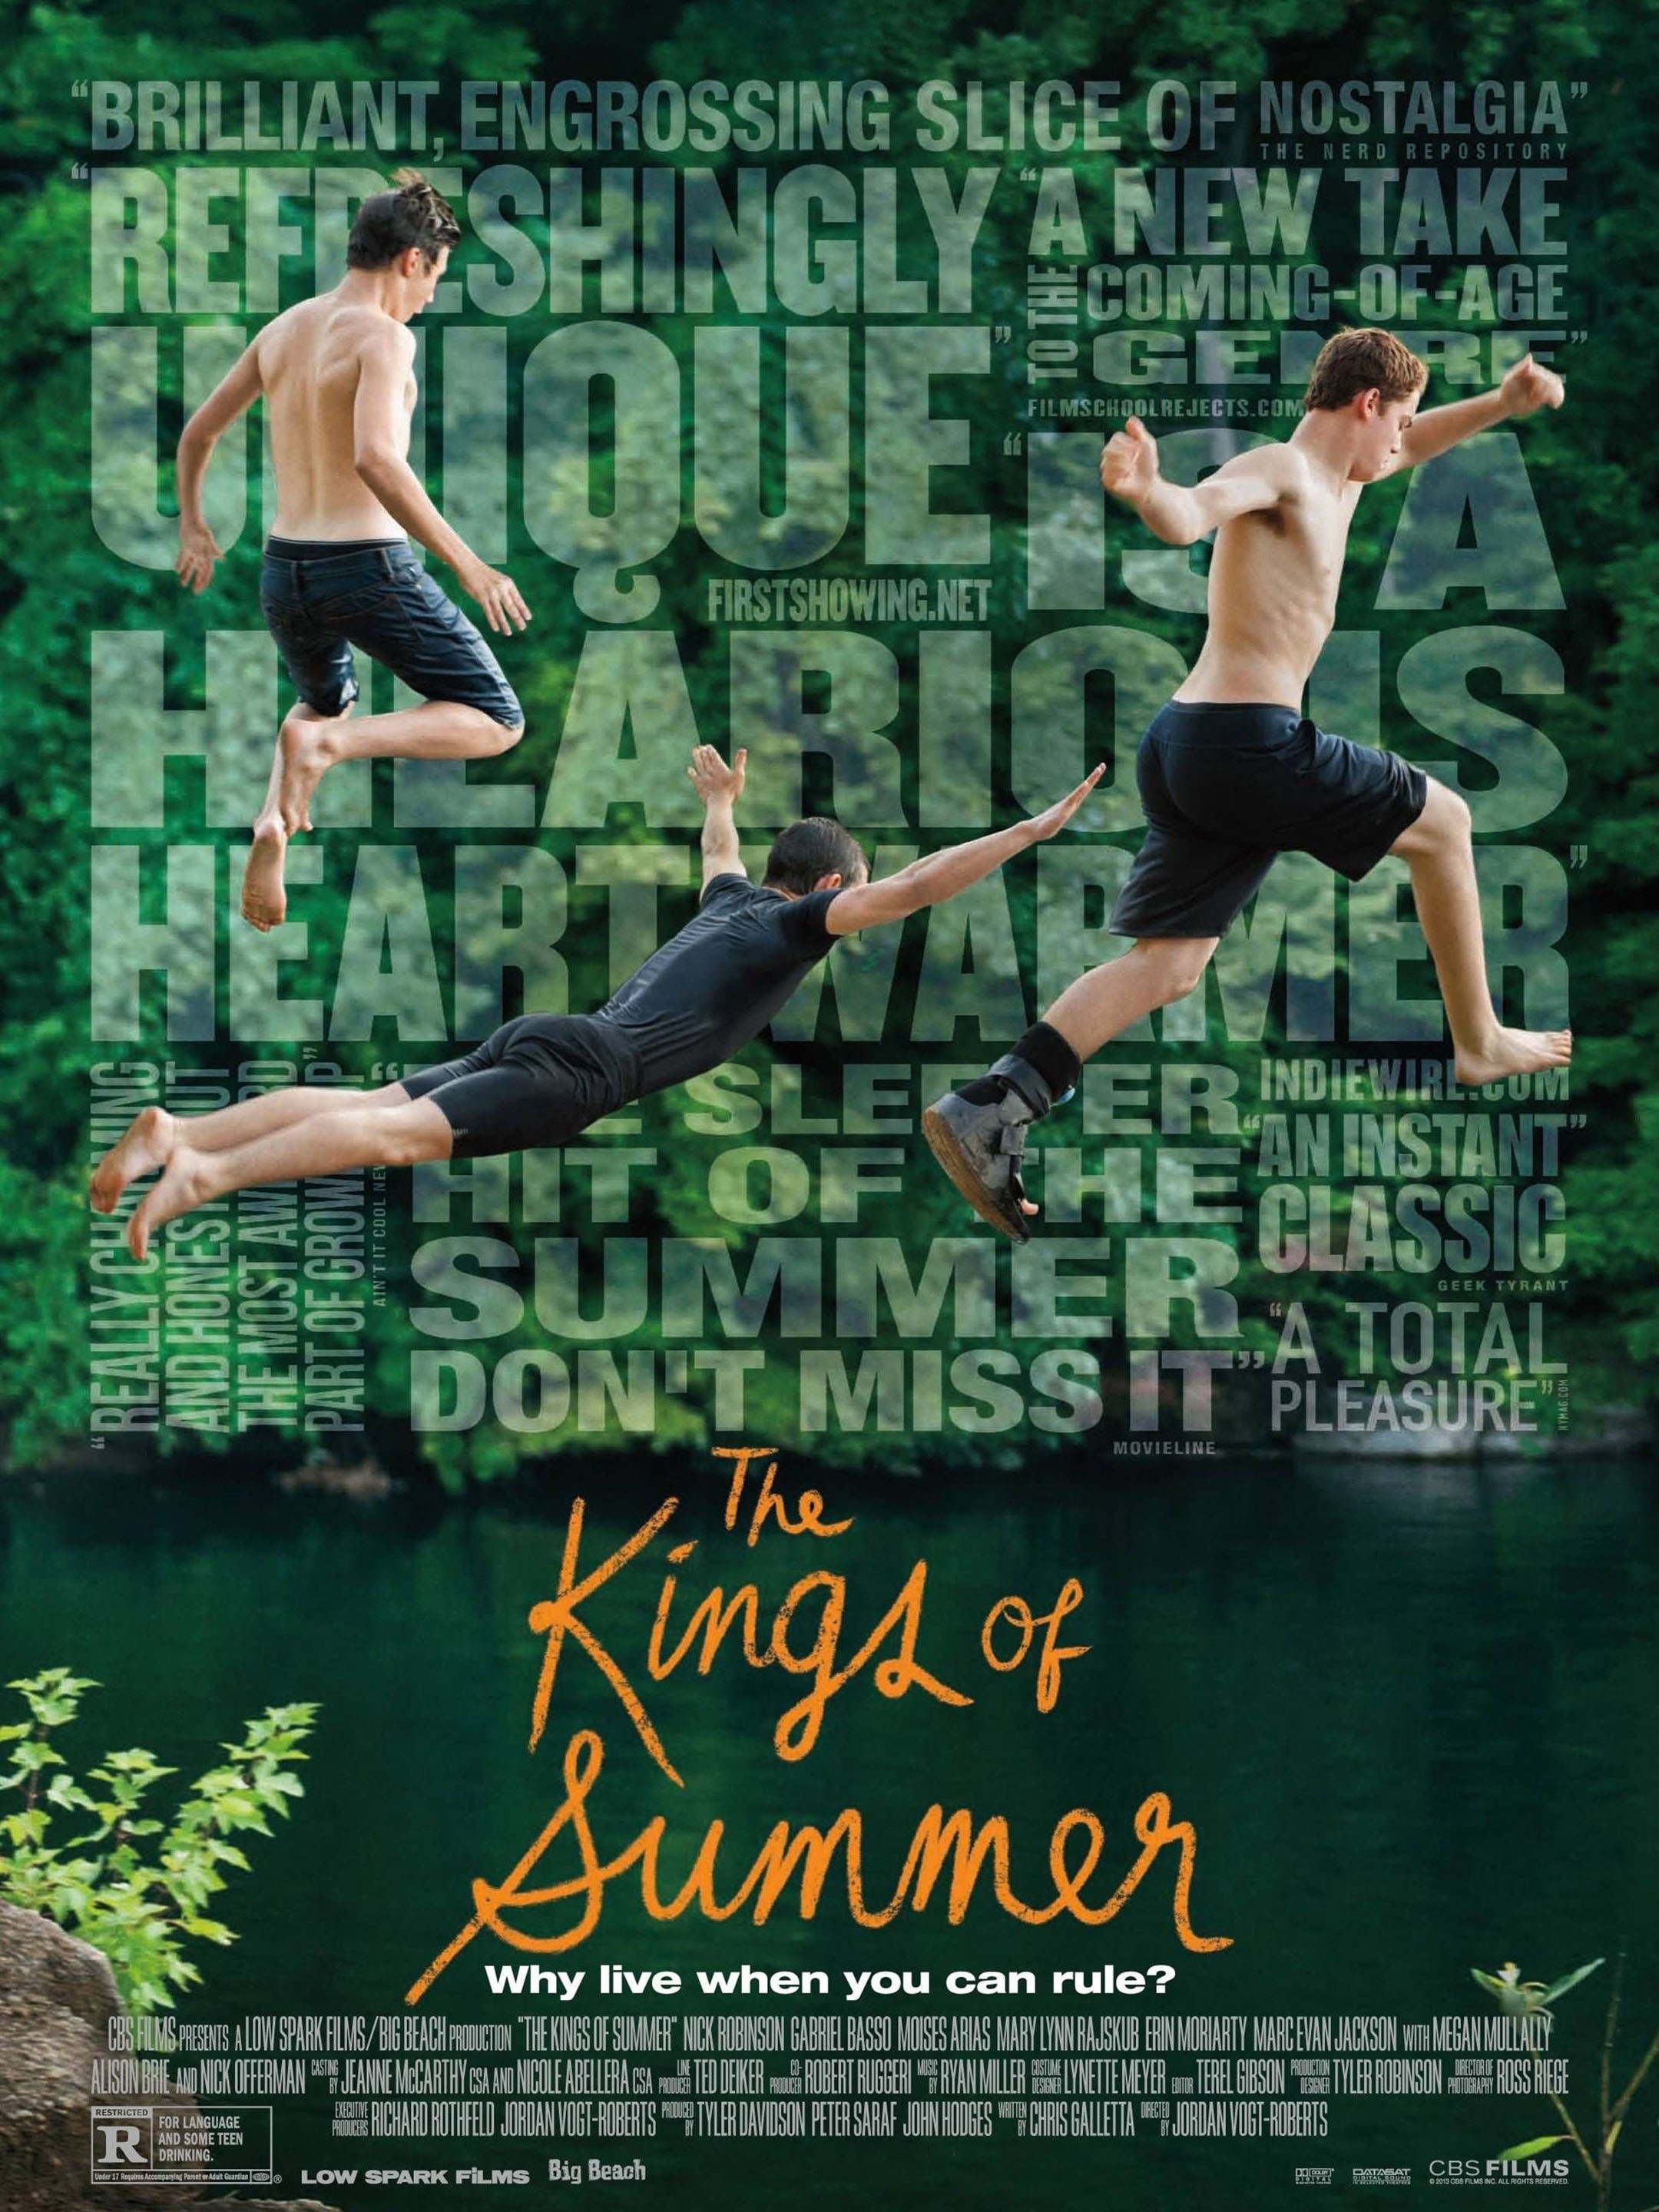 Movie Review: Comedy and Naturalism Clash in The Kings of Summer